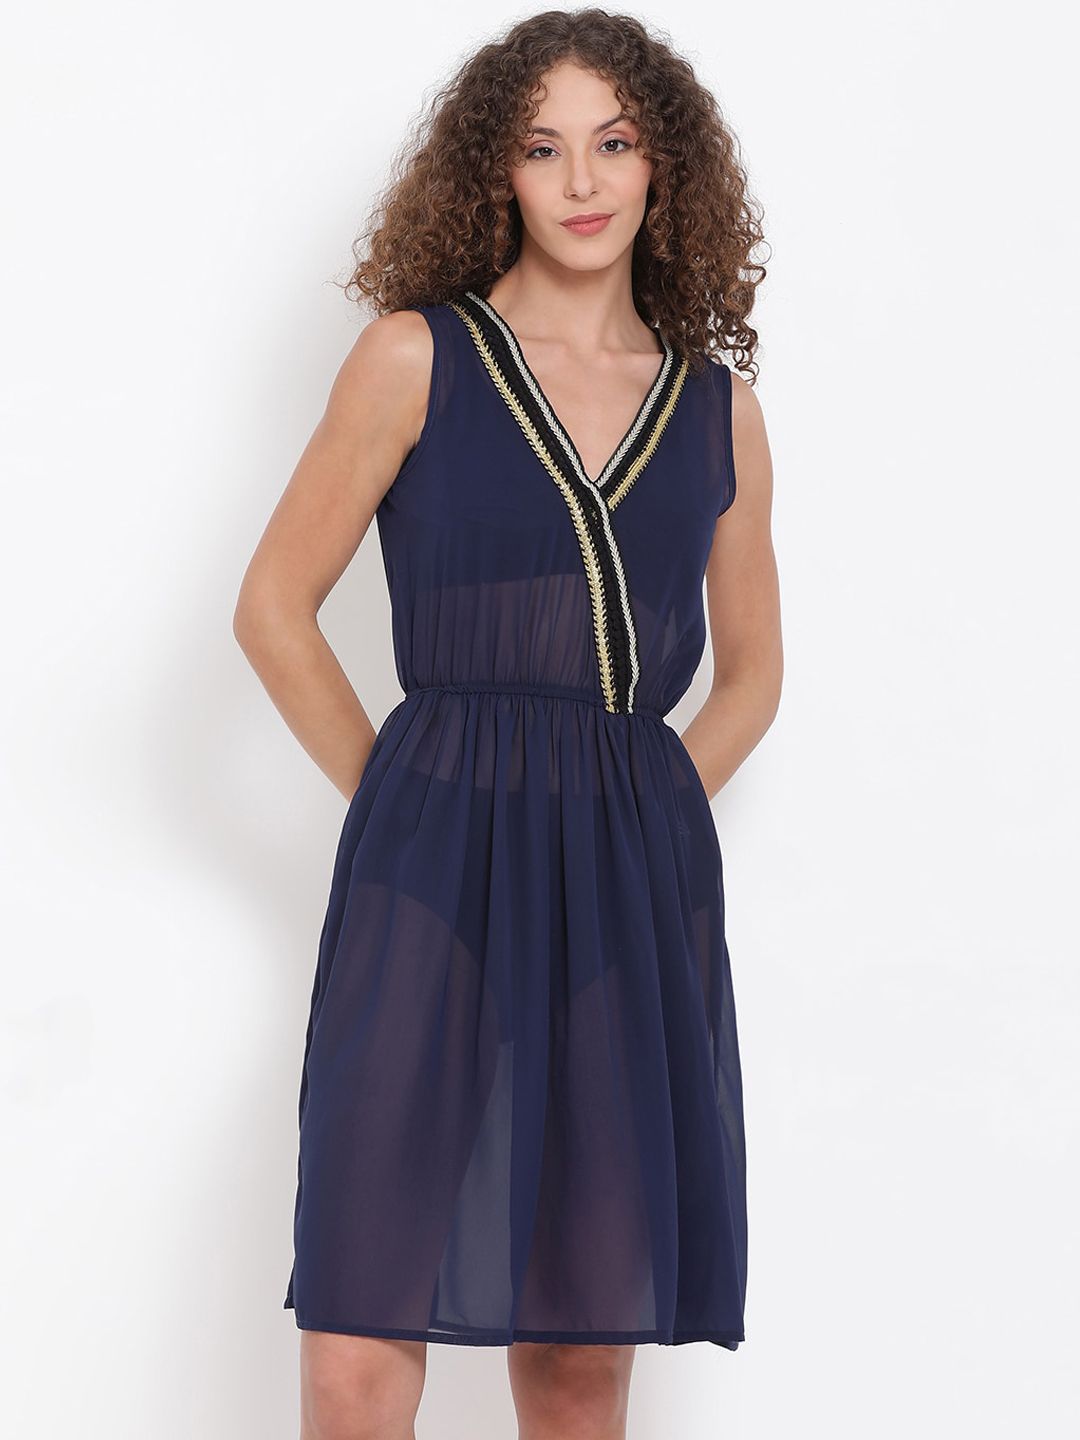 Oxolloxo Women Navy Blue Solid Cover-Up Swim Dress Price in India